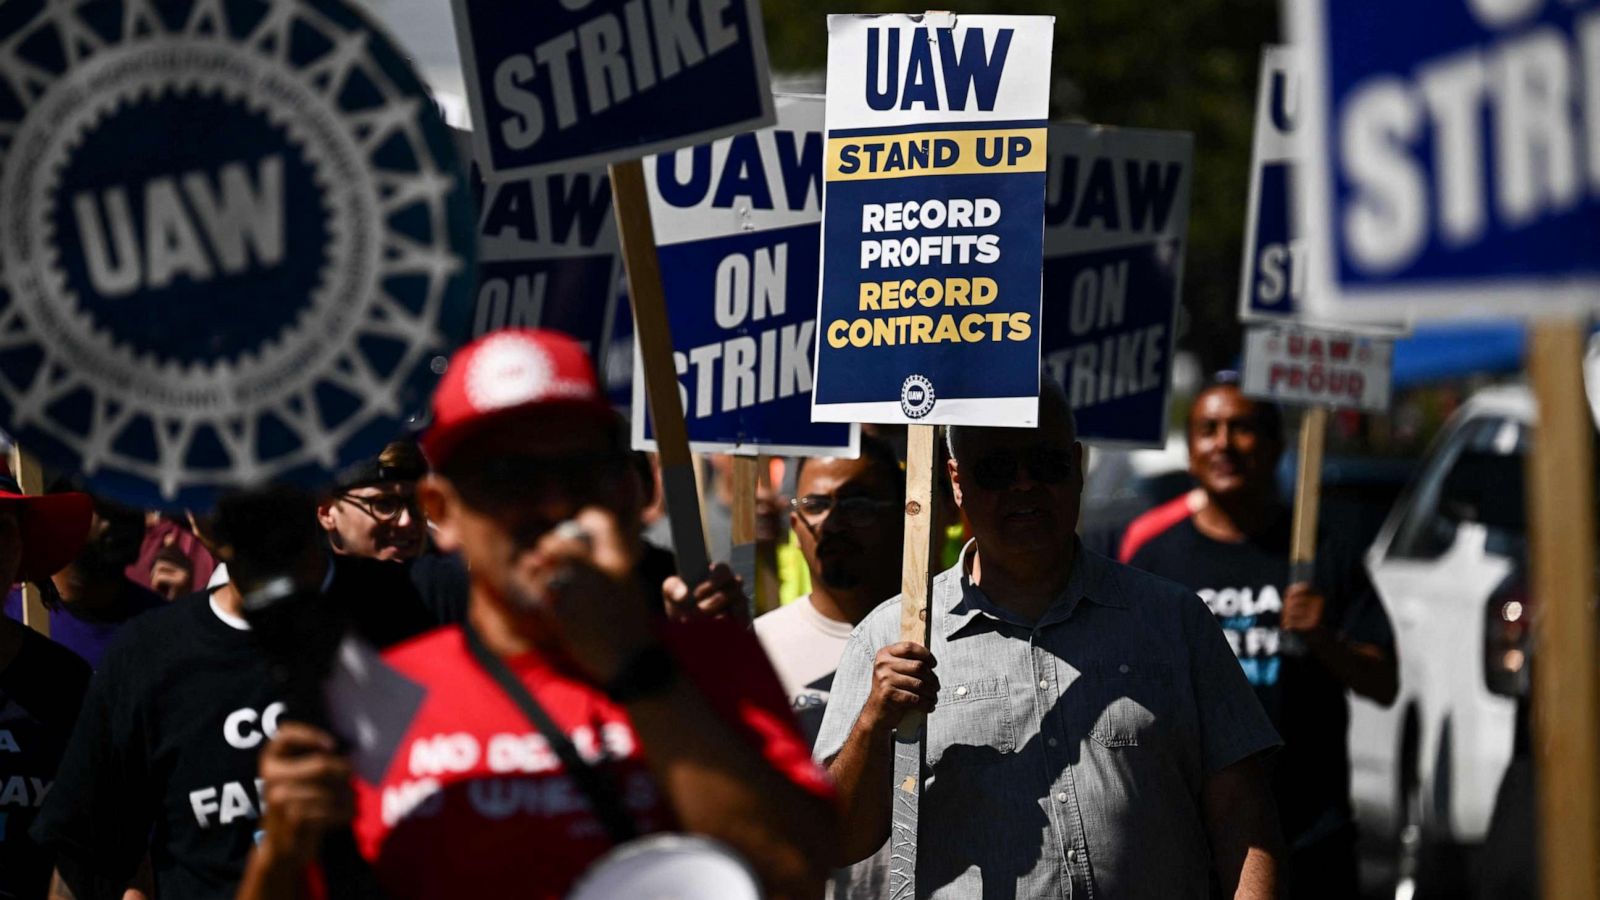 Update UAW strikes intensify The Oakland Post